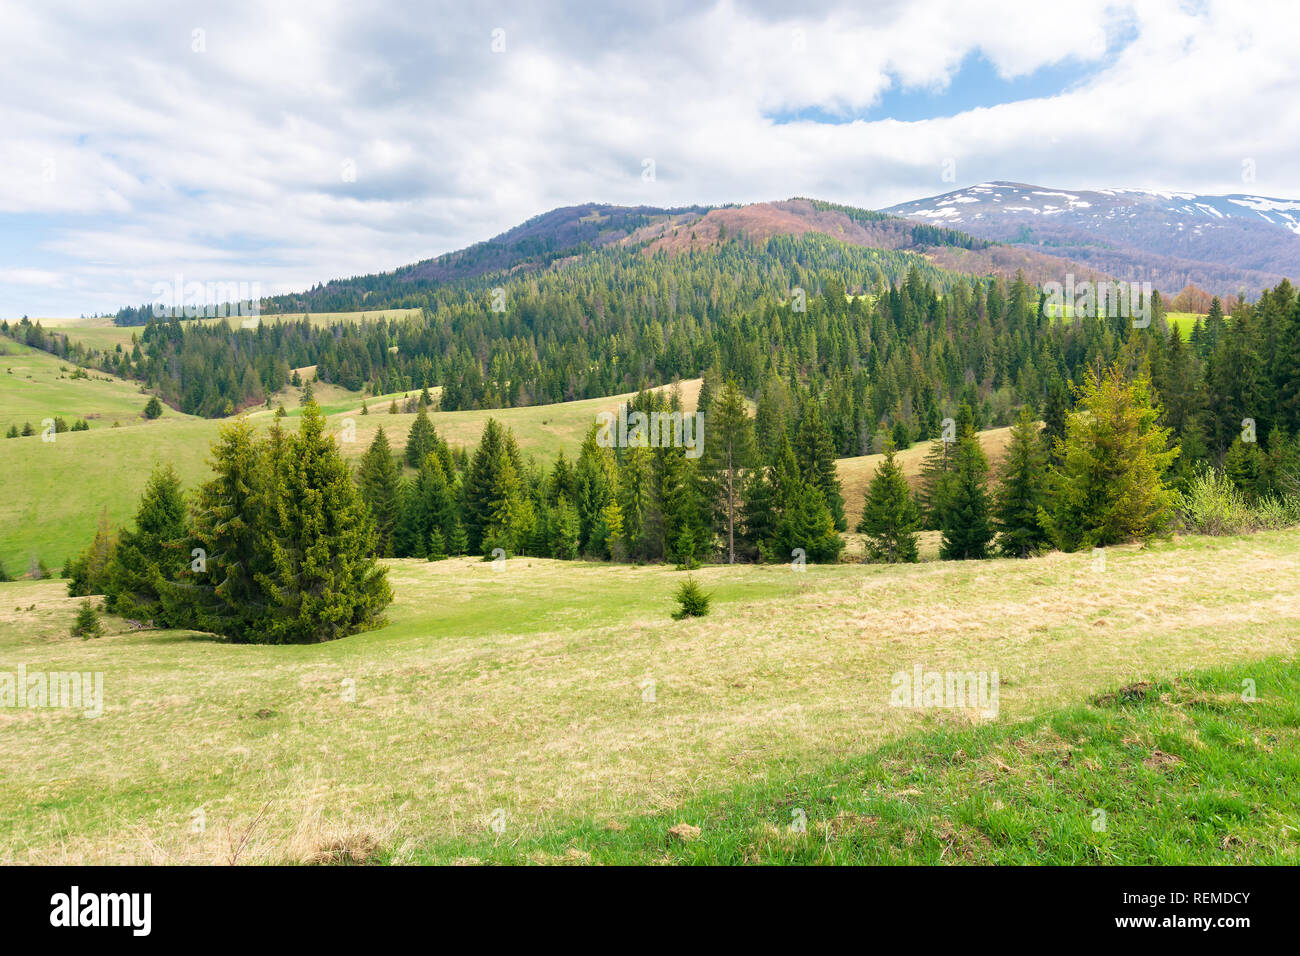 beautiful springtime landscape in mountains. spruce forest on a grassy meadow. spots of snow on the distant ridge. cloudy day Stock Photo